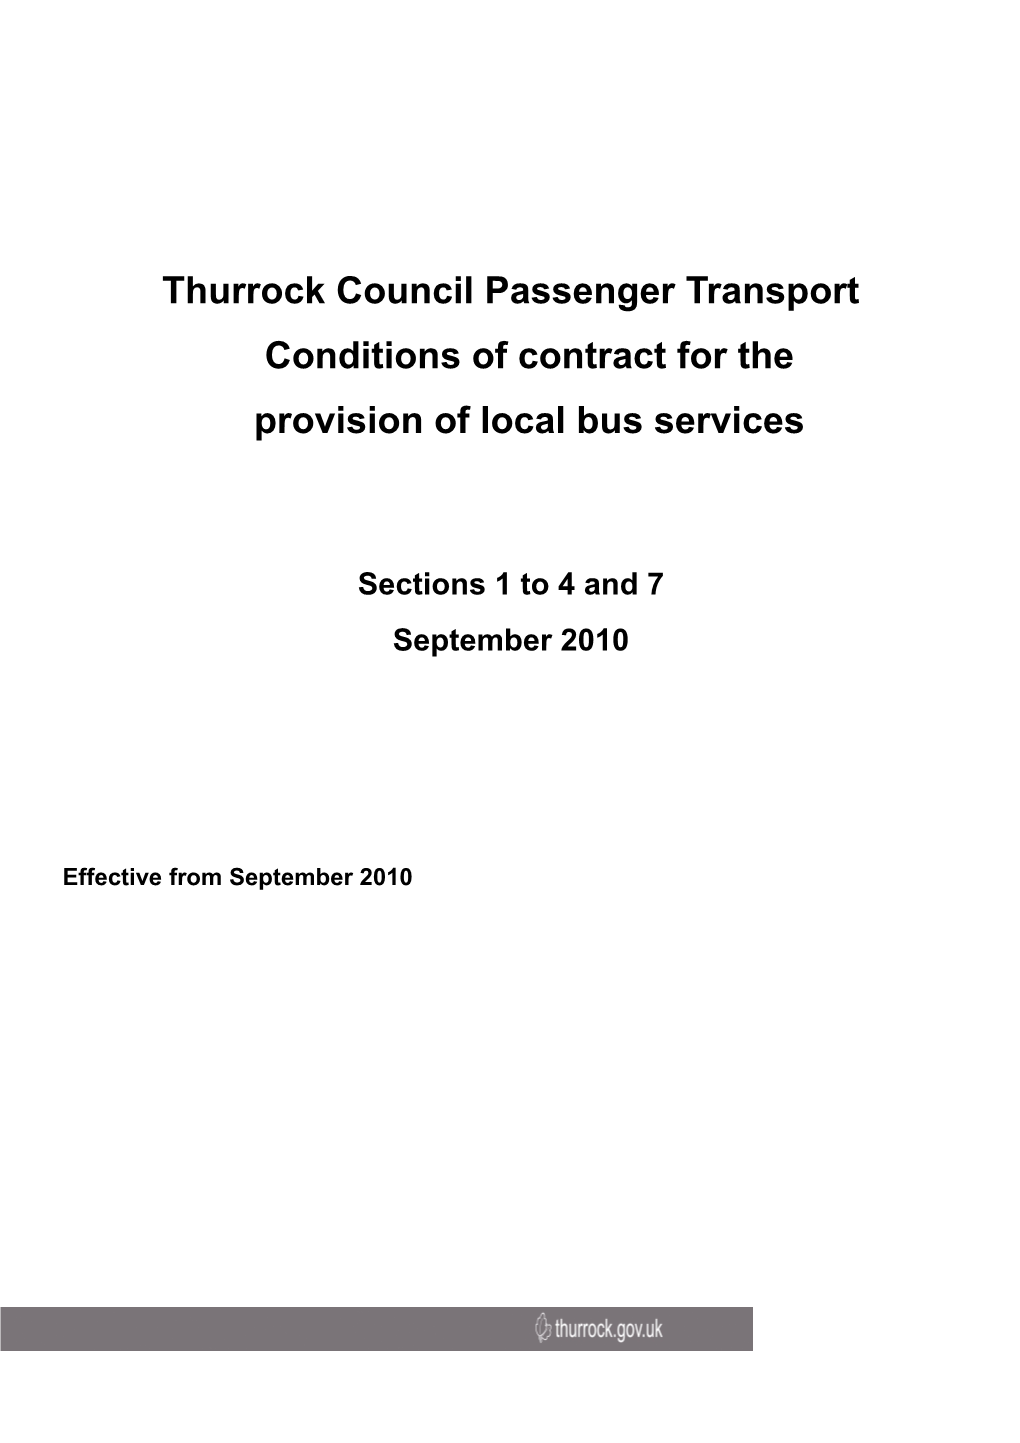 Thurrock Council - Conditions of Contract for the Provision of Local Bus Services